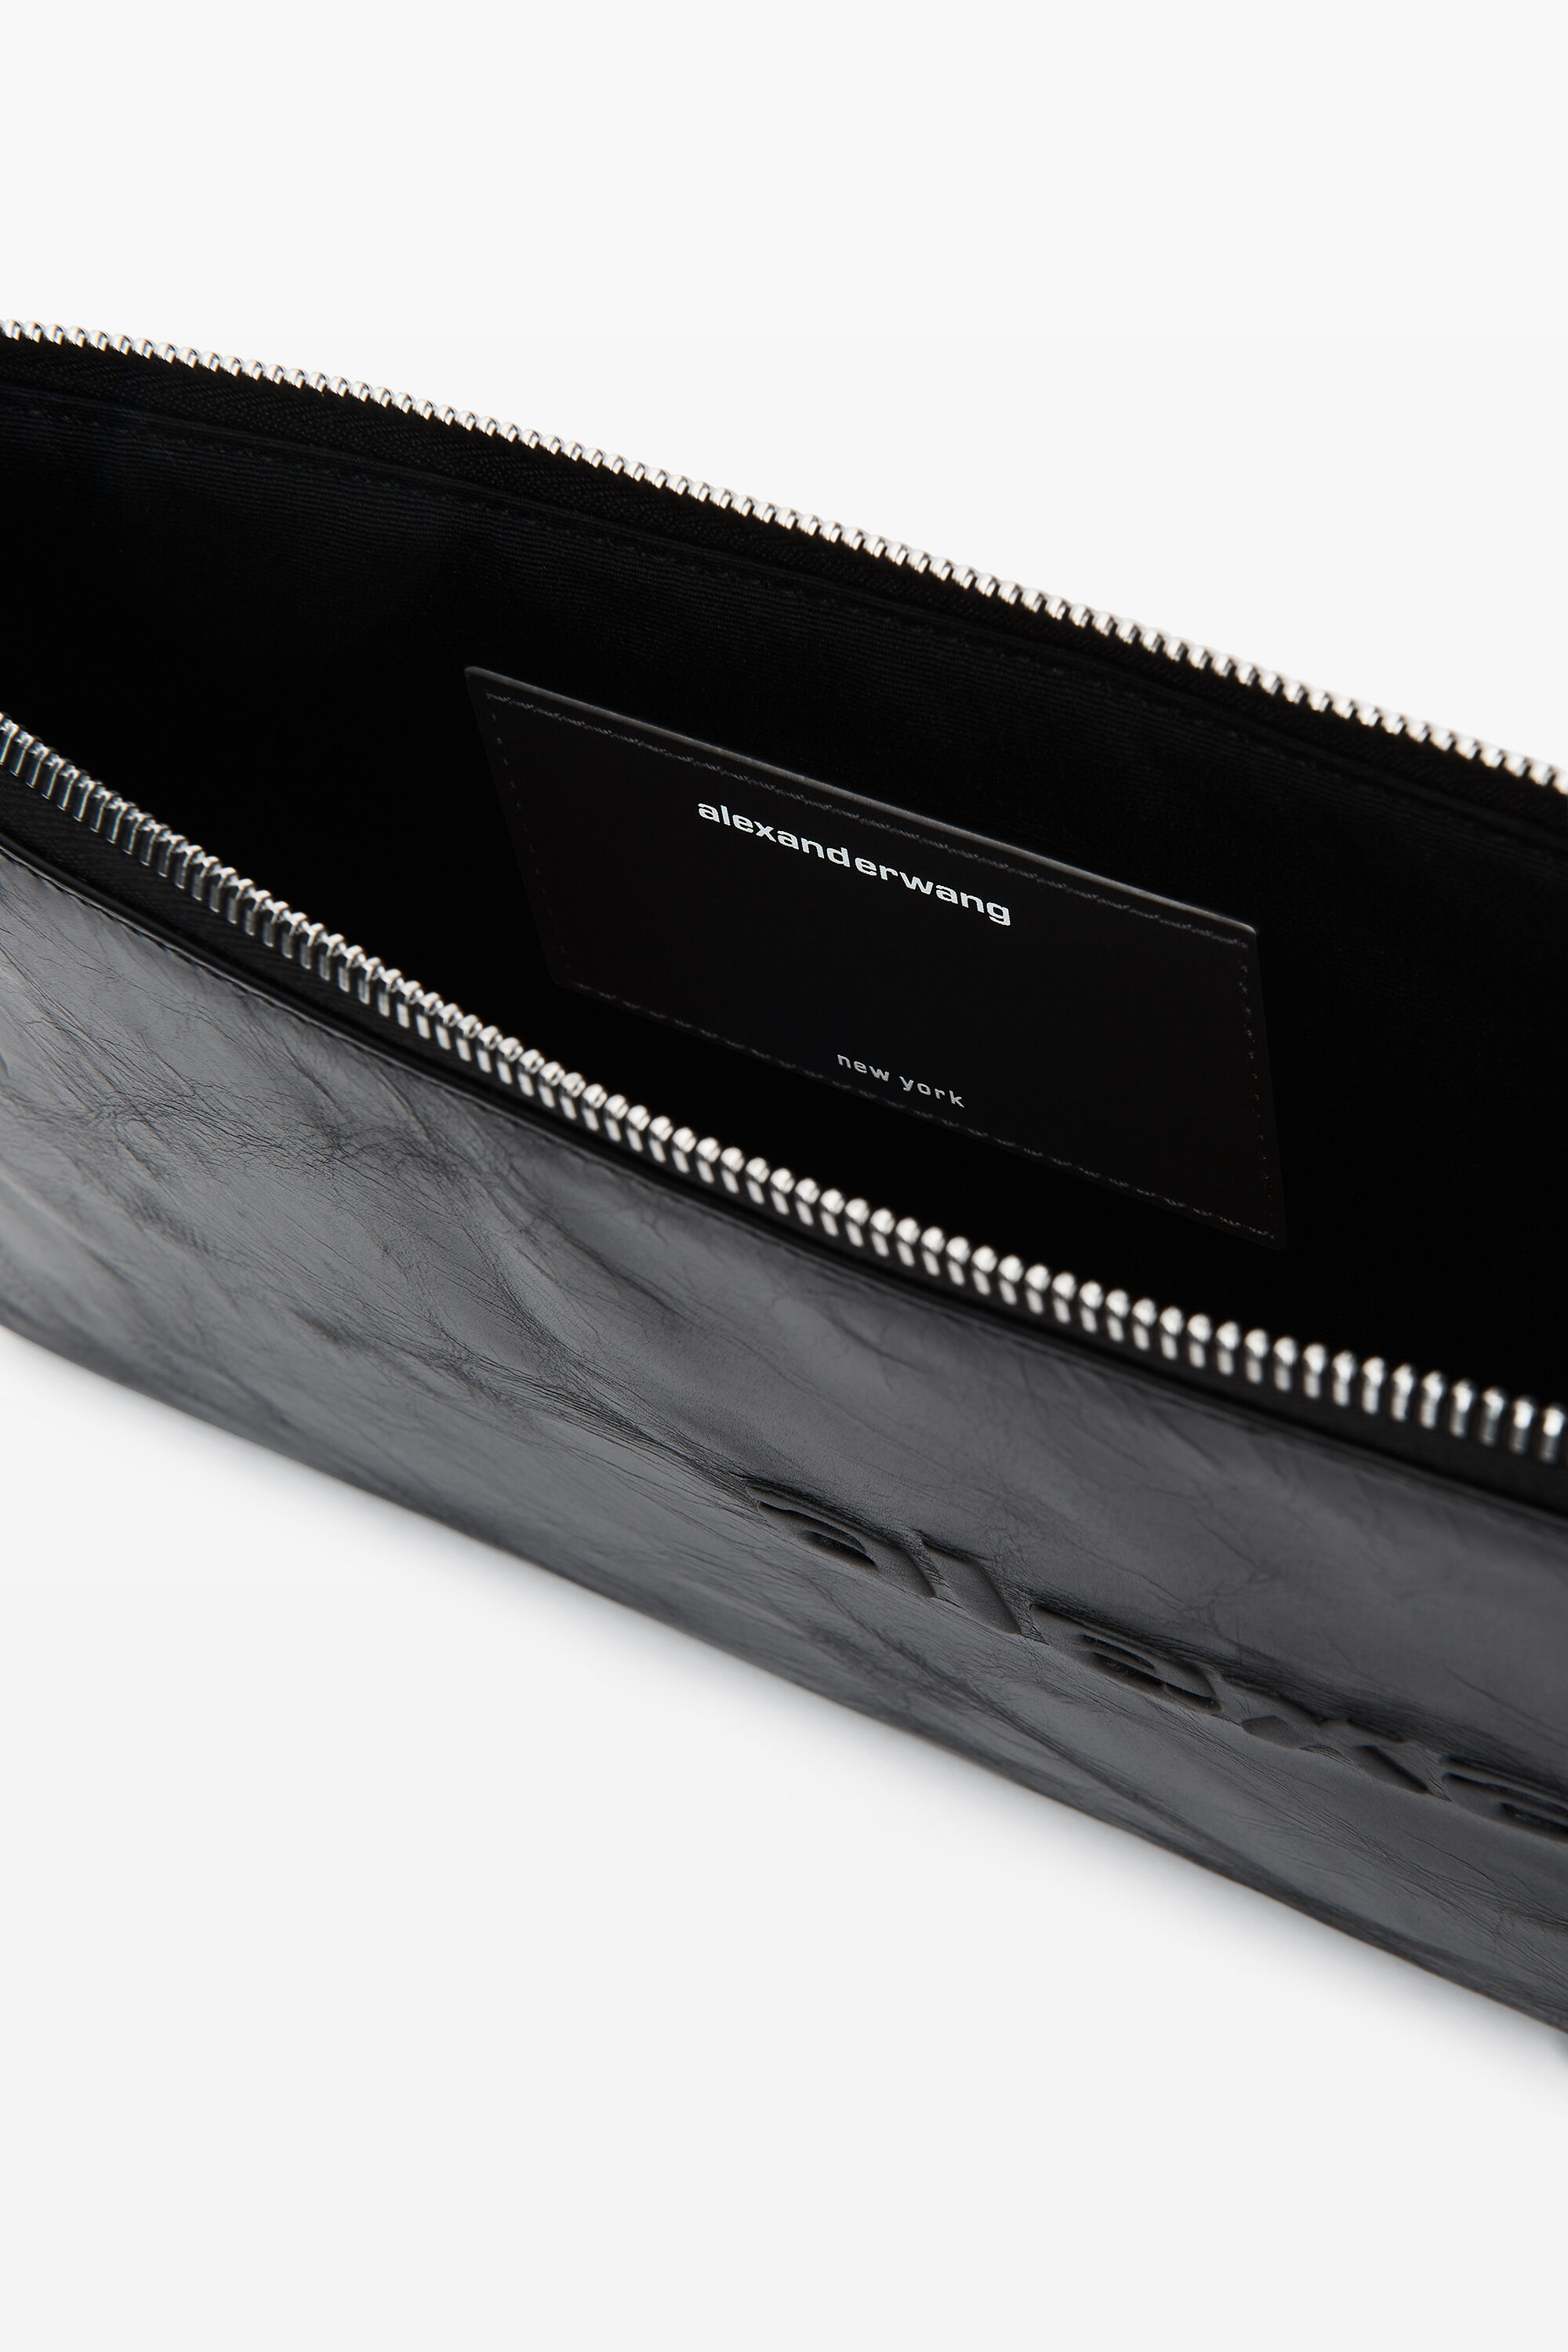 punch zip pouch in crackle patent leather in BLACK | alexanderwang®